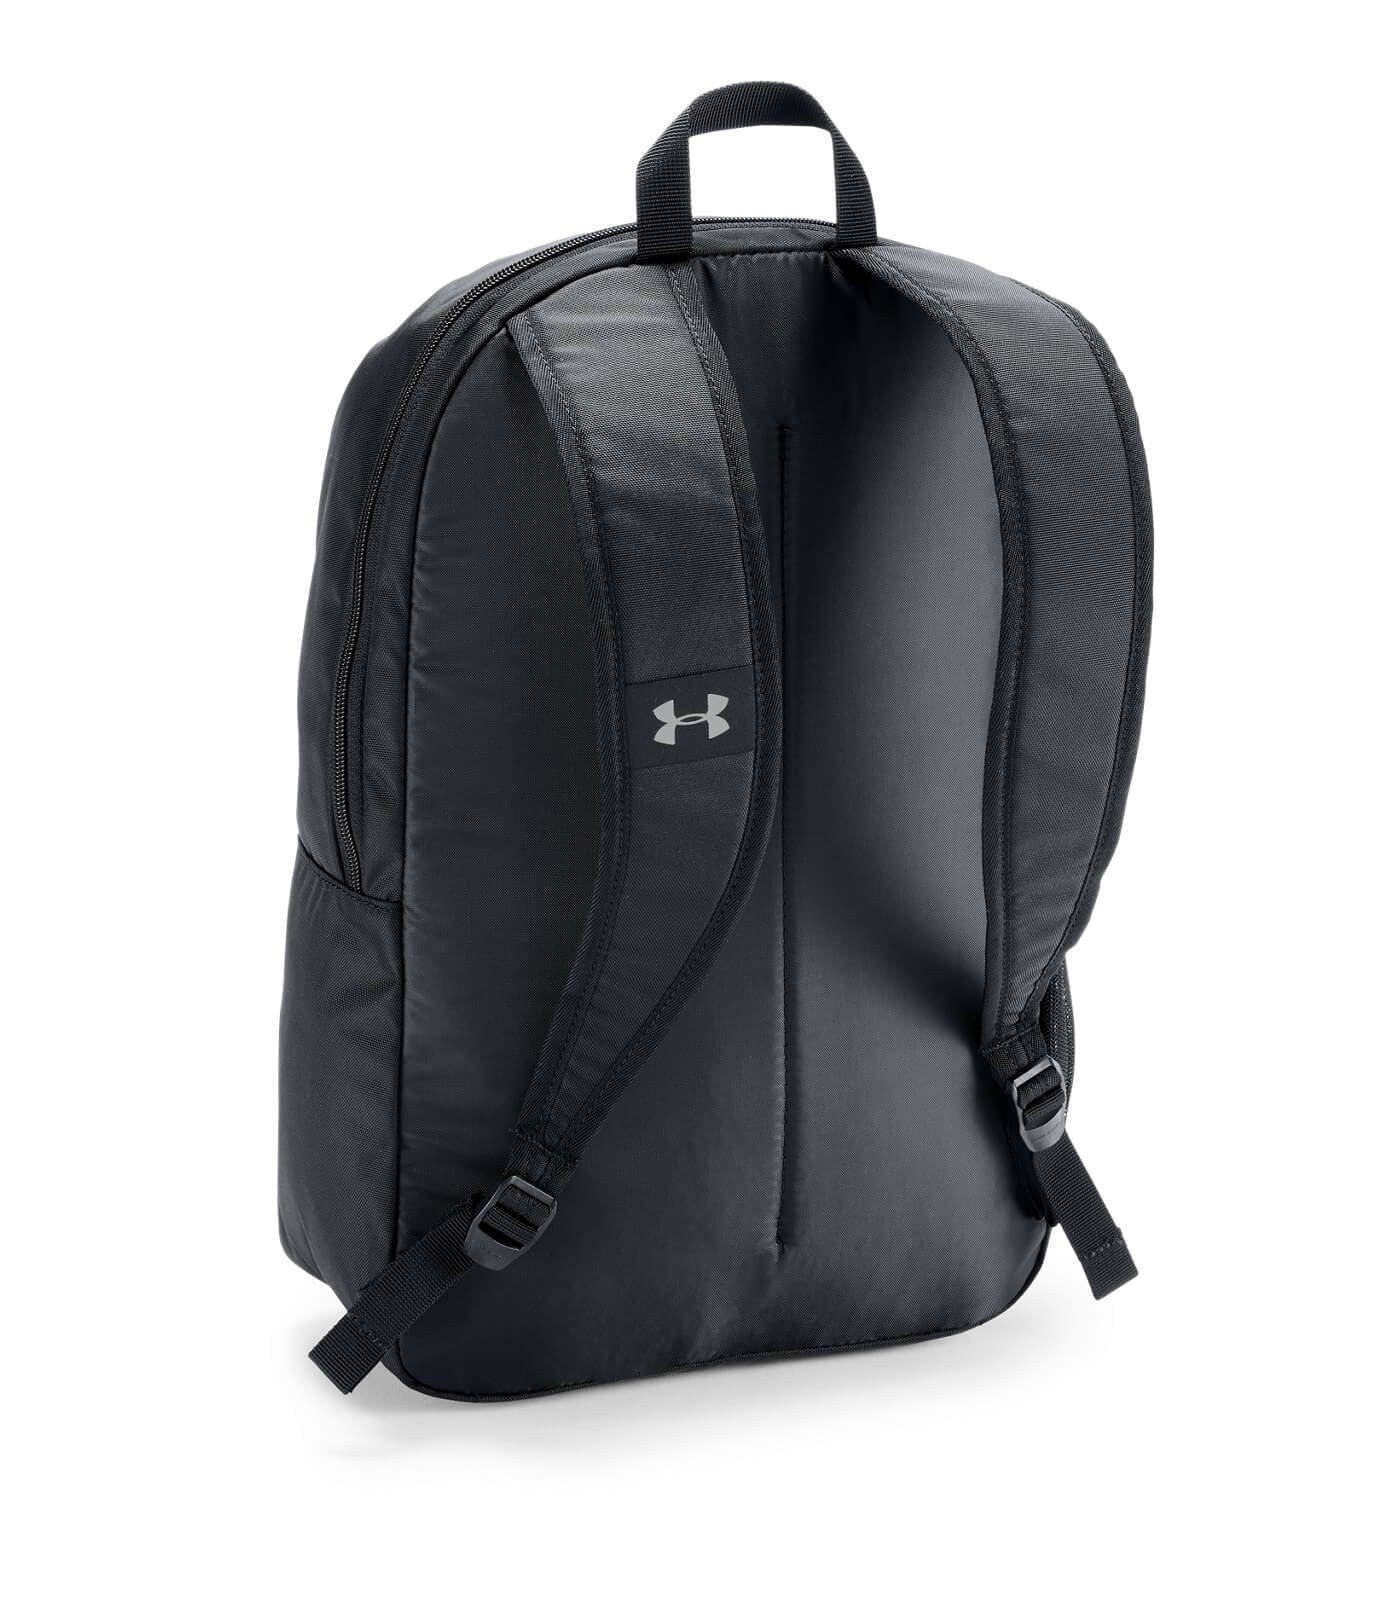 Under Armour Project 5 Backpack Black